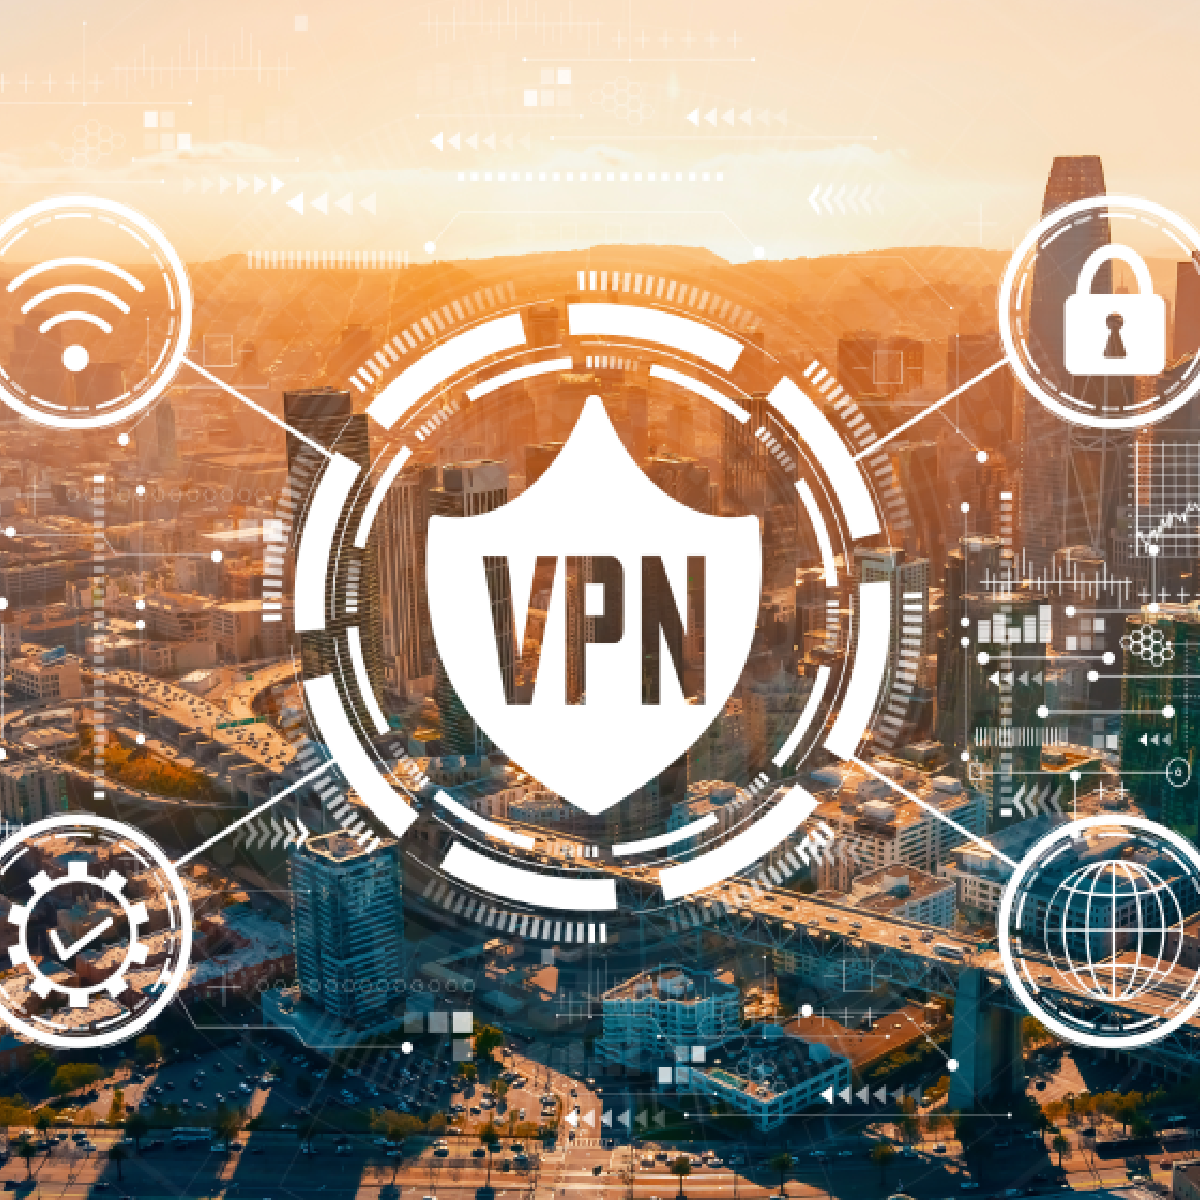 VPN concept with downtown San Francisco skyline buildings